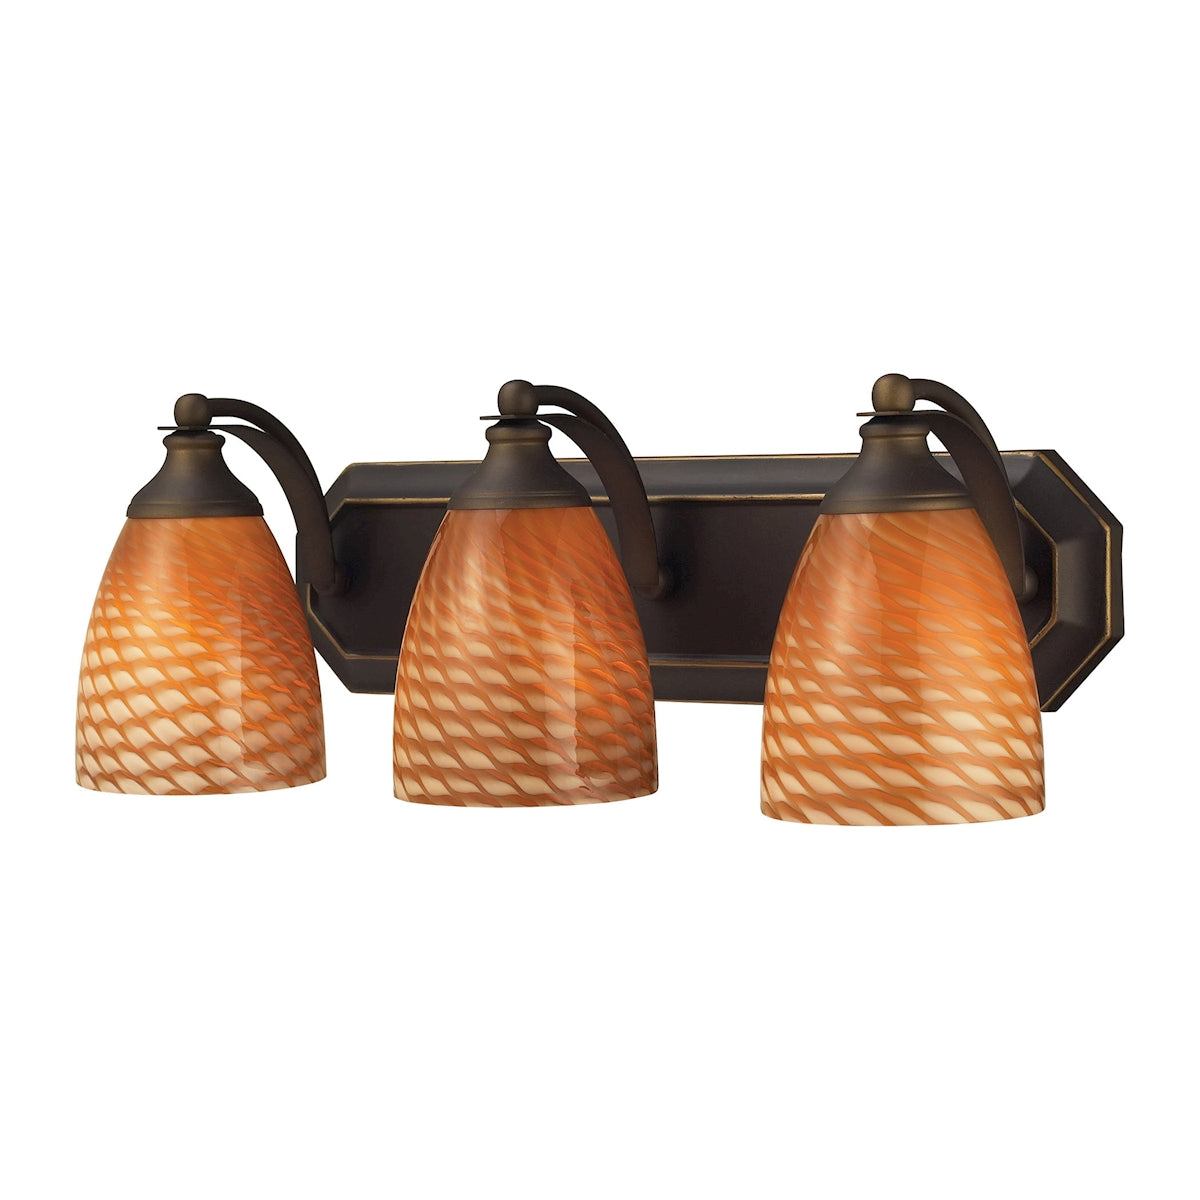 Mix-N-Match Vanity 3-Light Wall Lamp in Aged Bronze with Cocoa Glass